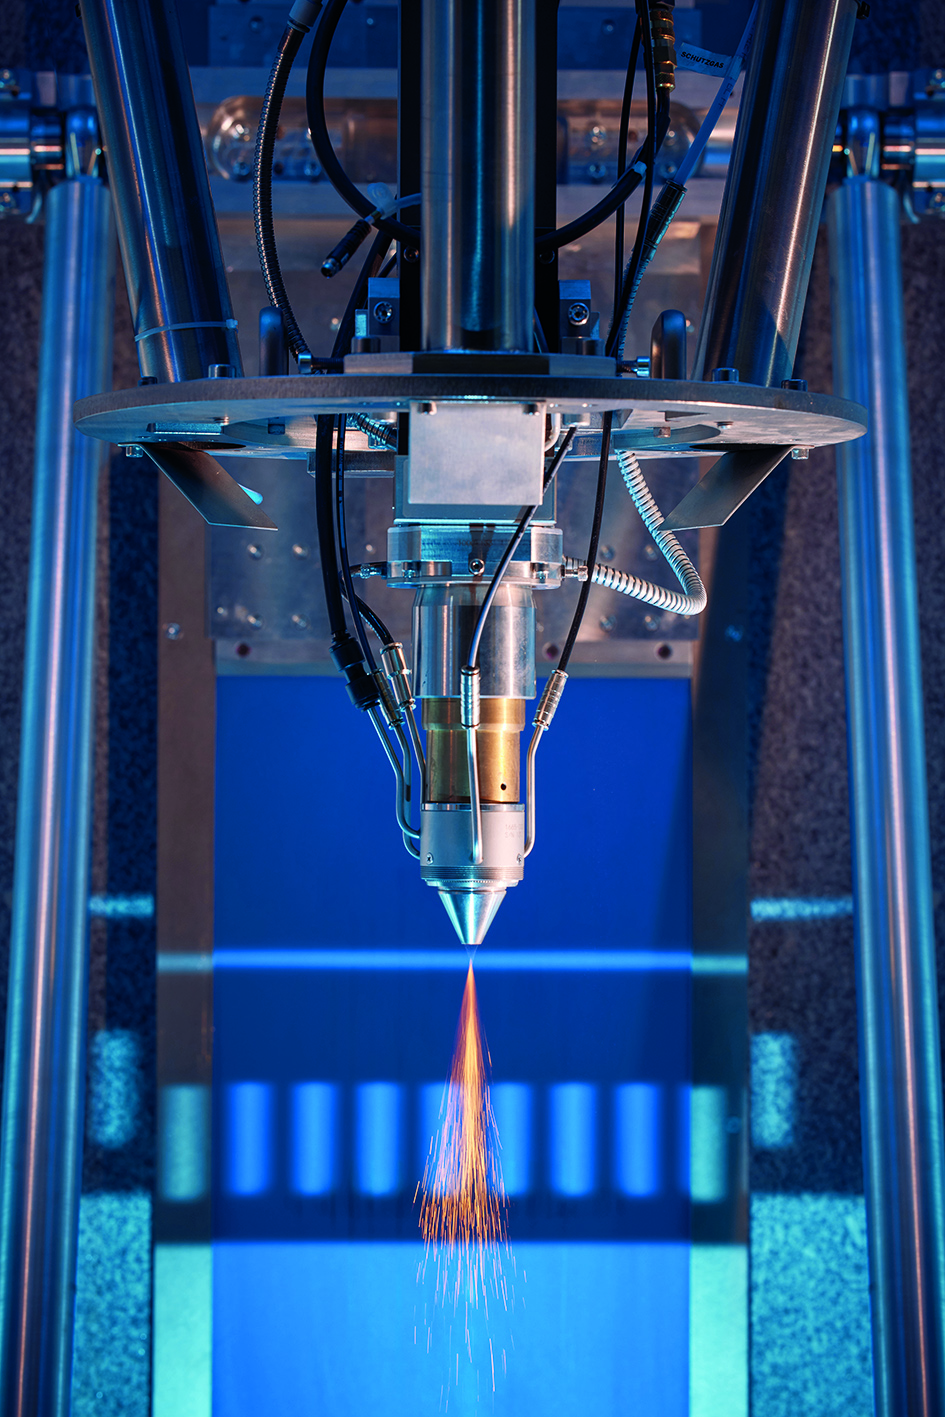 Researchers at Fraunhofer ILT are using laser metal deposition to additively manufacture space components. A flexible and fast alternative to conventional production with forming, welding and mechanical processing.